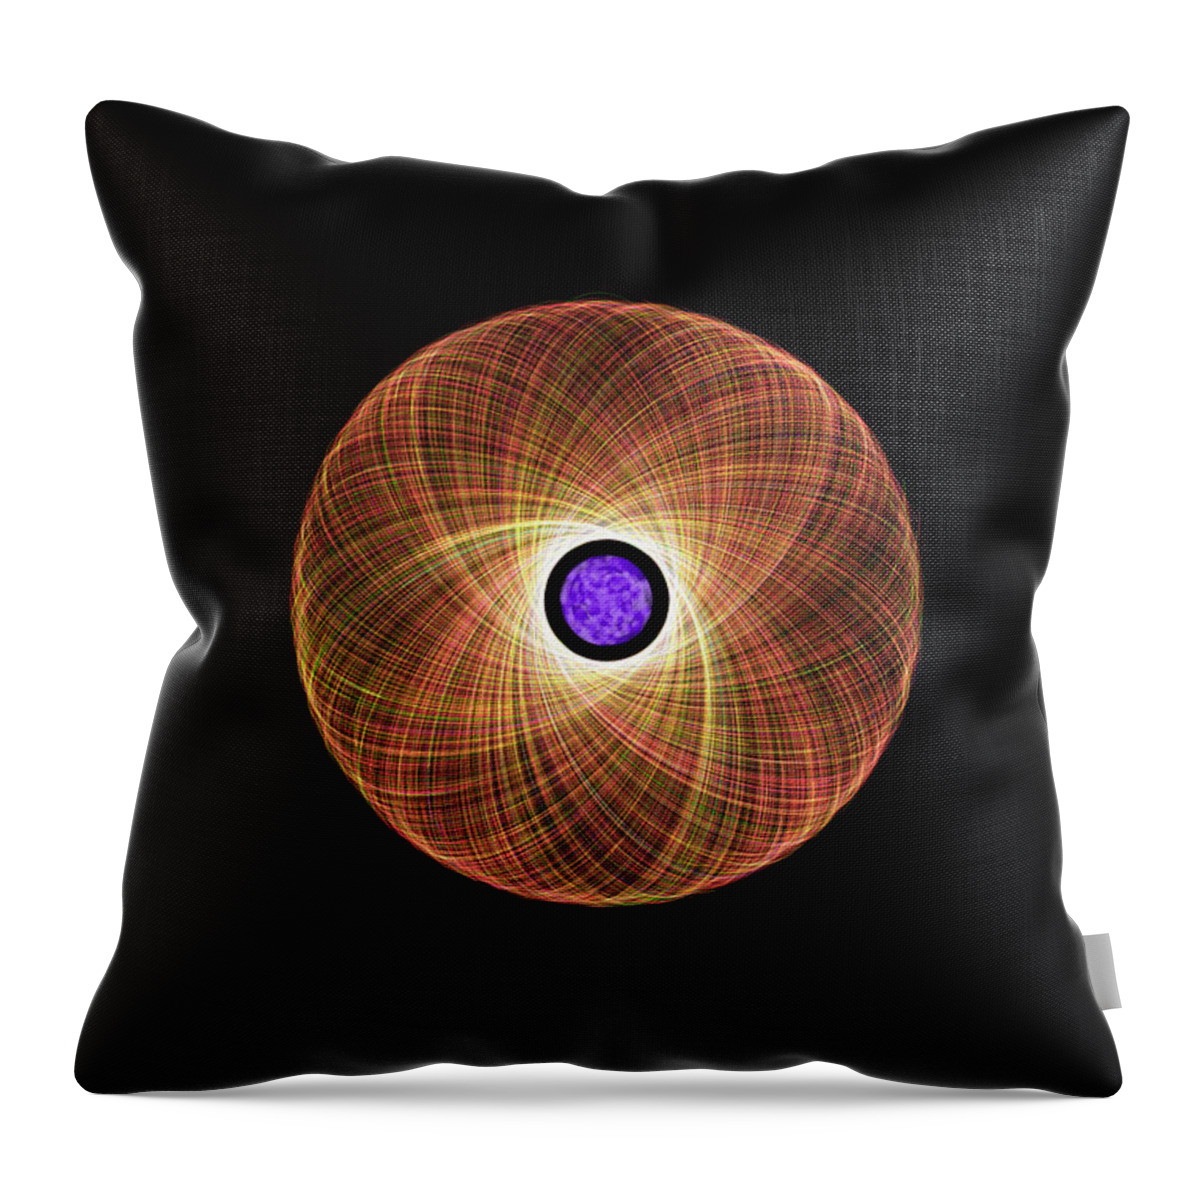  Throw Pillow featuring the digital art . #1 by April Cook